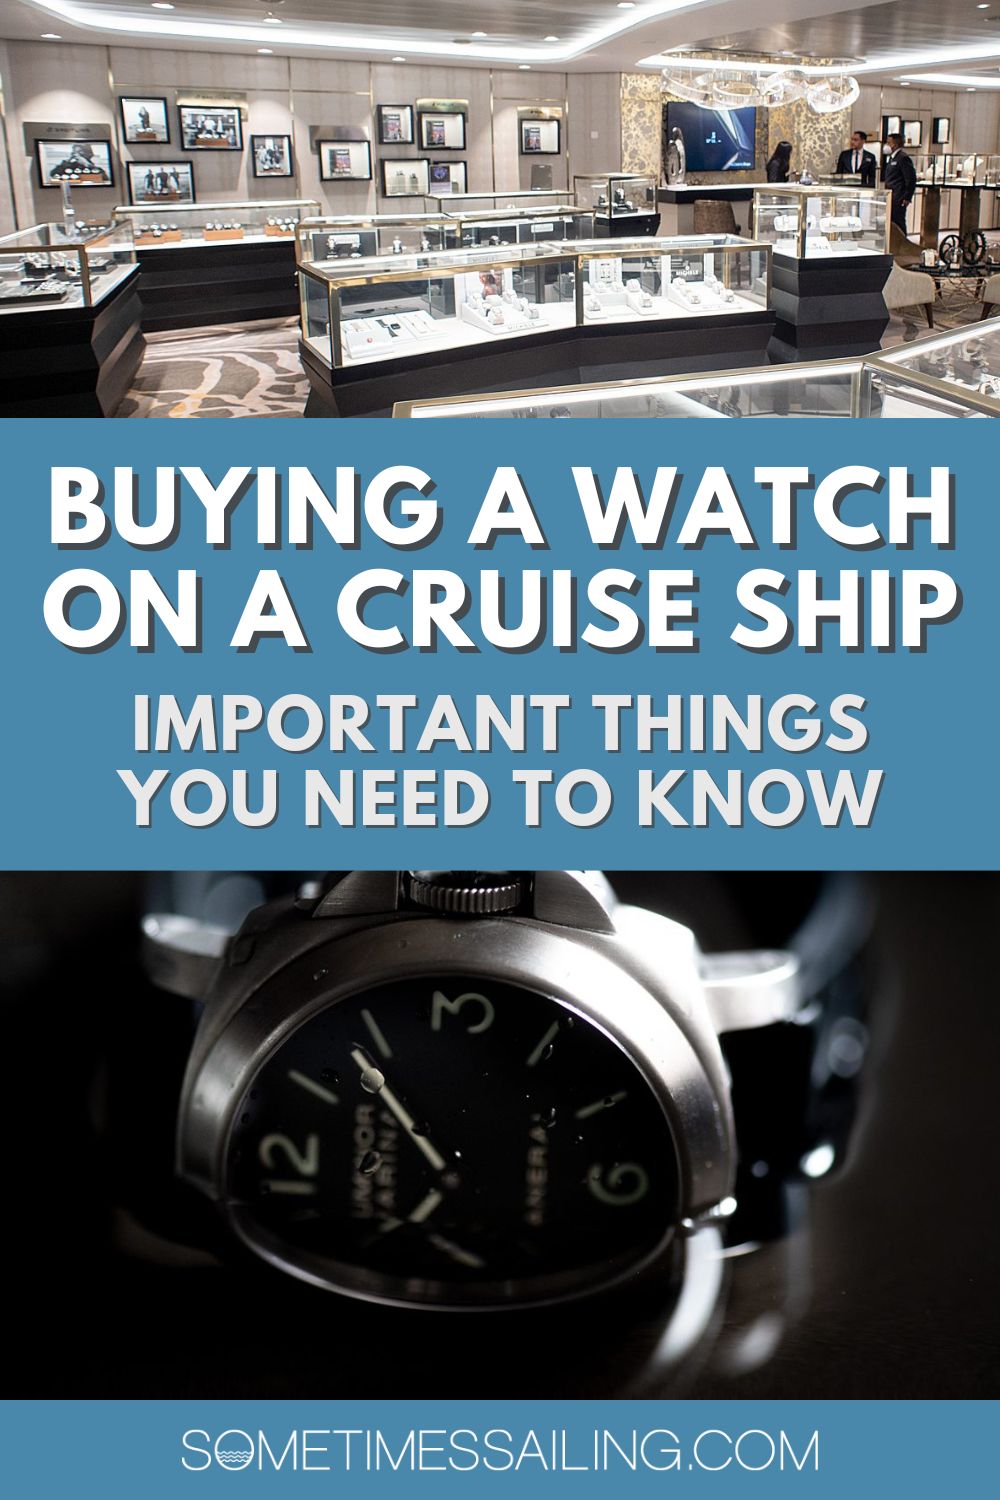 Buying a watch on a cruise ship: important things you need to know with watch photos.